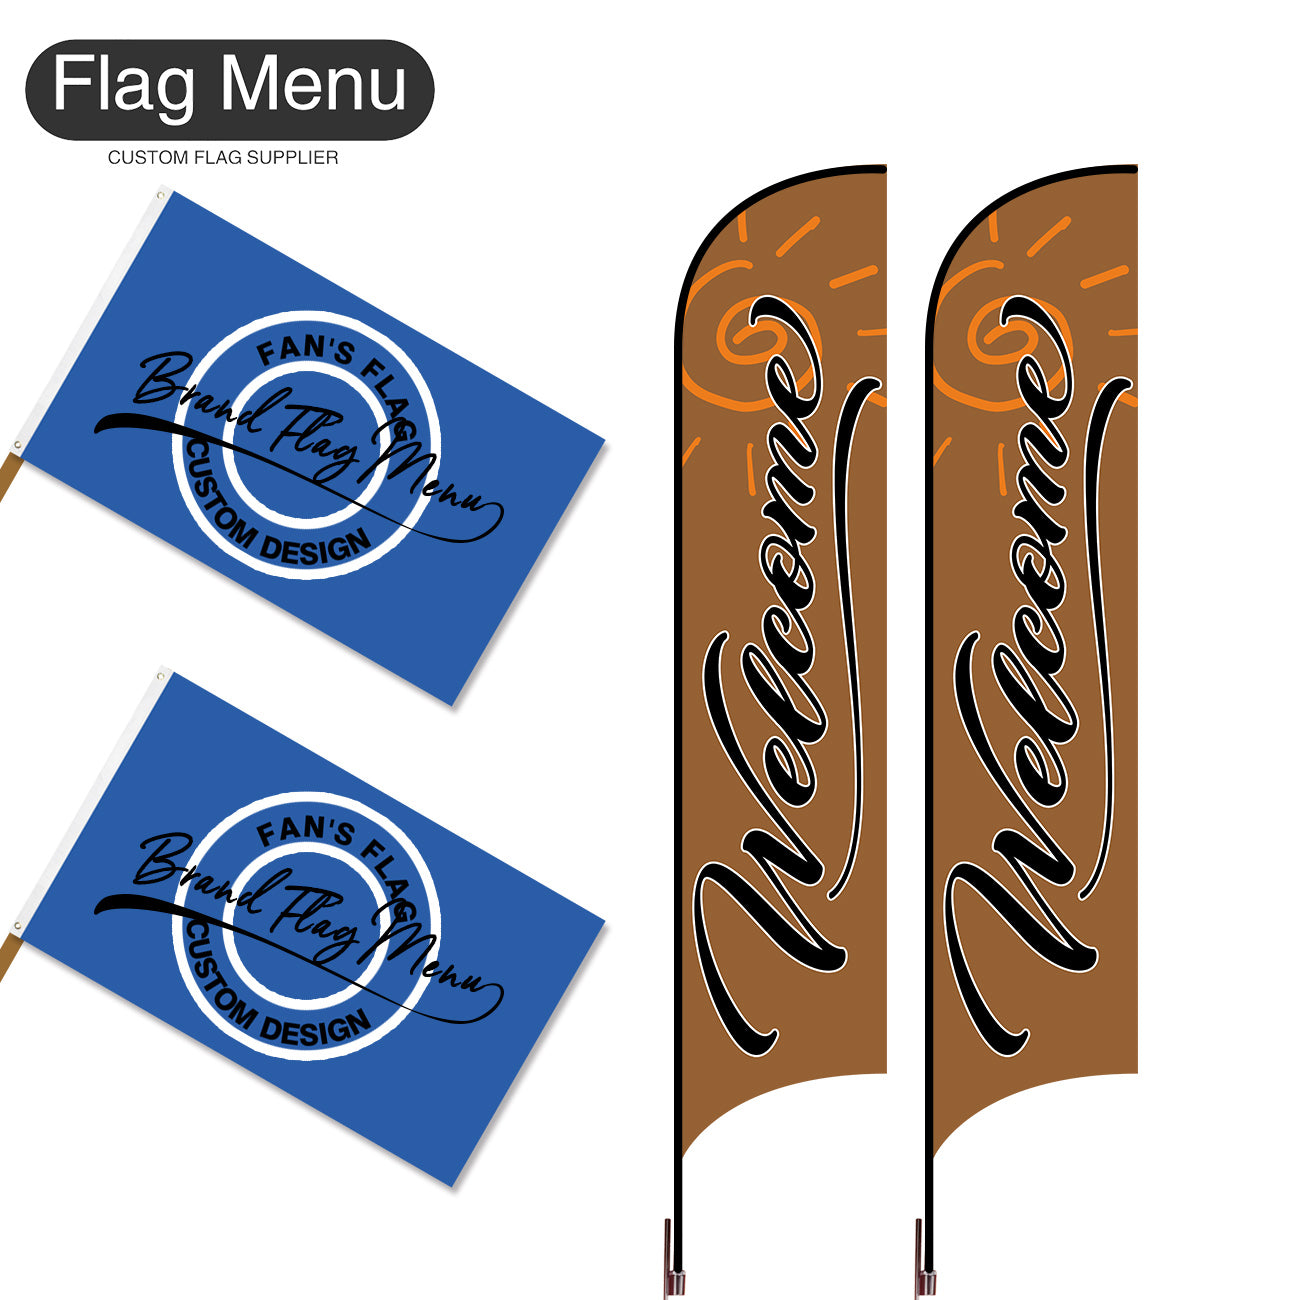 Outdoor Advertising Set - D-Brown-S - Feather Flag -Double Sided & 3'x5' Regular Flag -Single Sided-Cross & Water Bag-Flag Menu